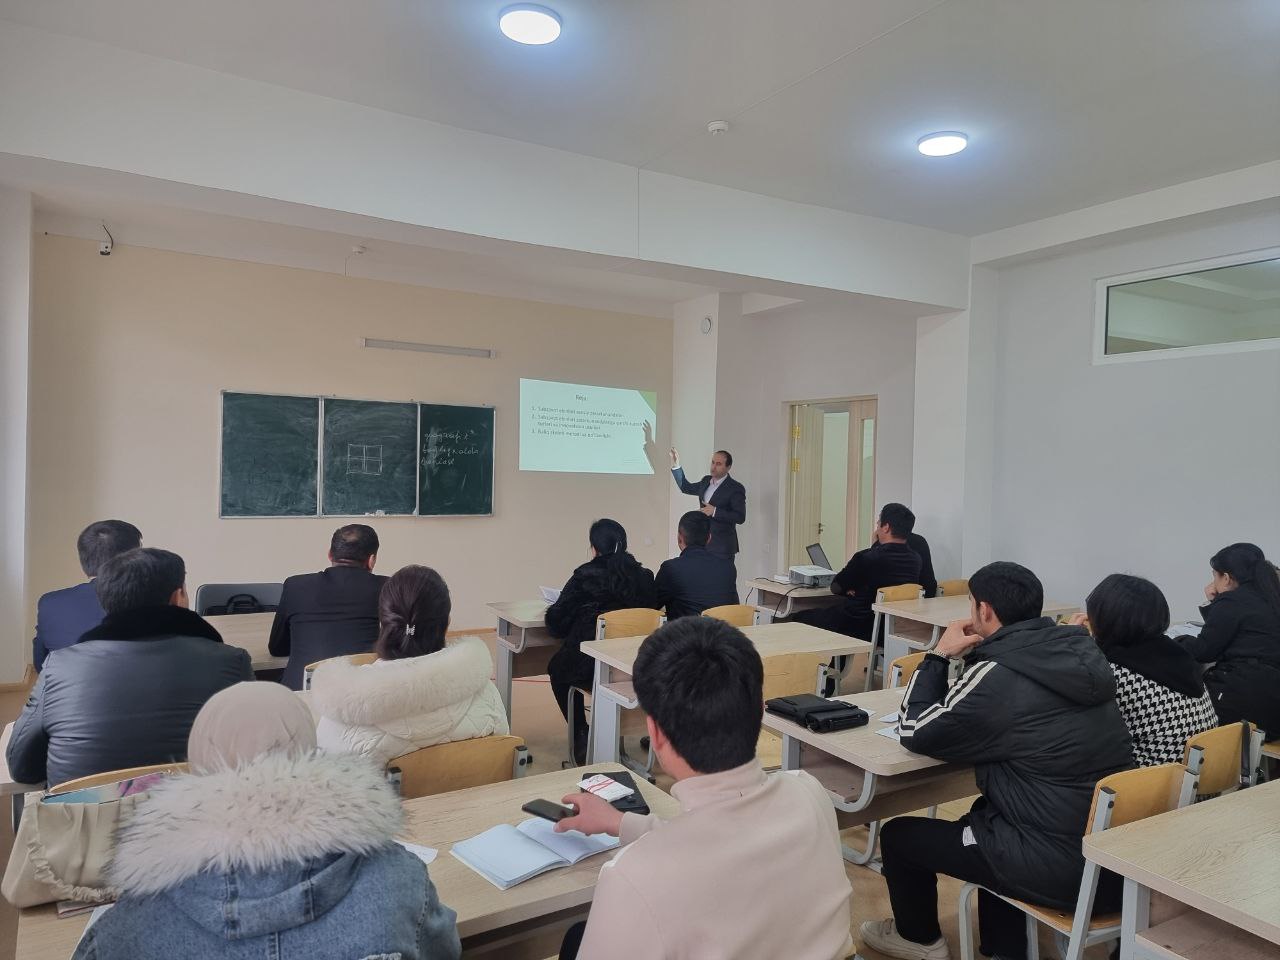 Scientific-theoretical seminar of Atajanov Temur, intern teacher of the Department of Fruit and Vegetables of Urganch State University on biological c